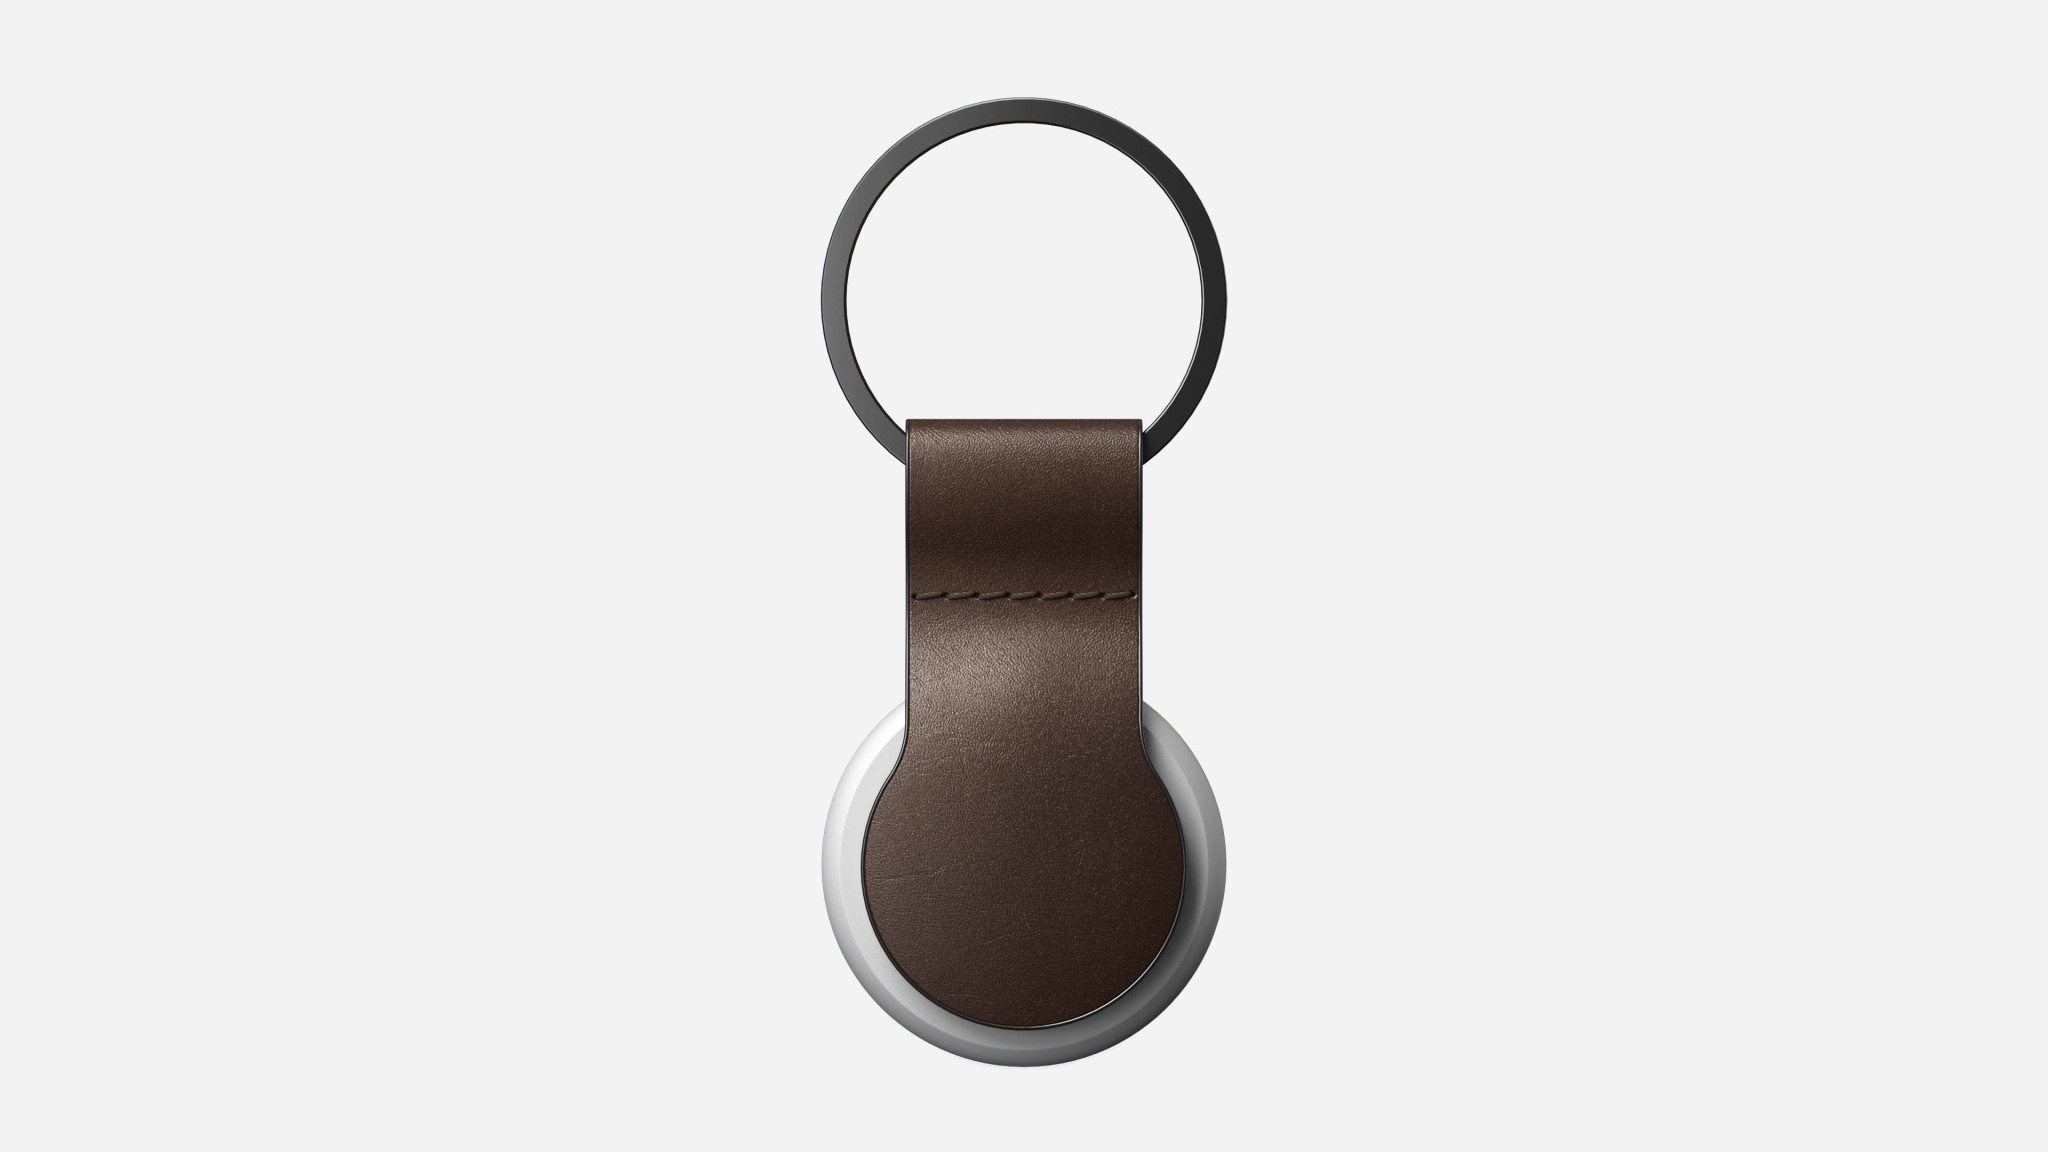 A brown leather keyring holding an AirTag